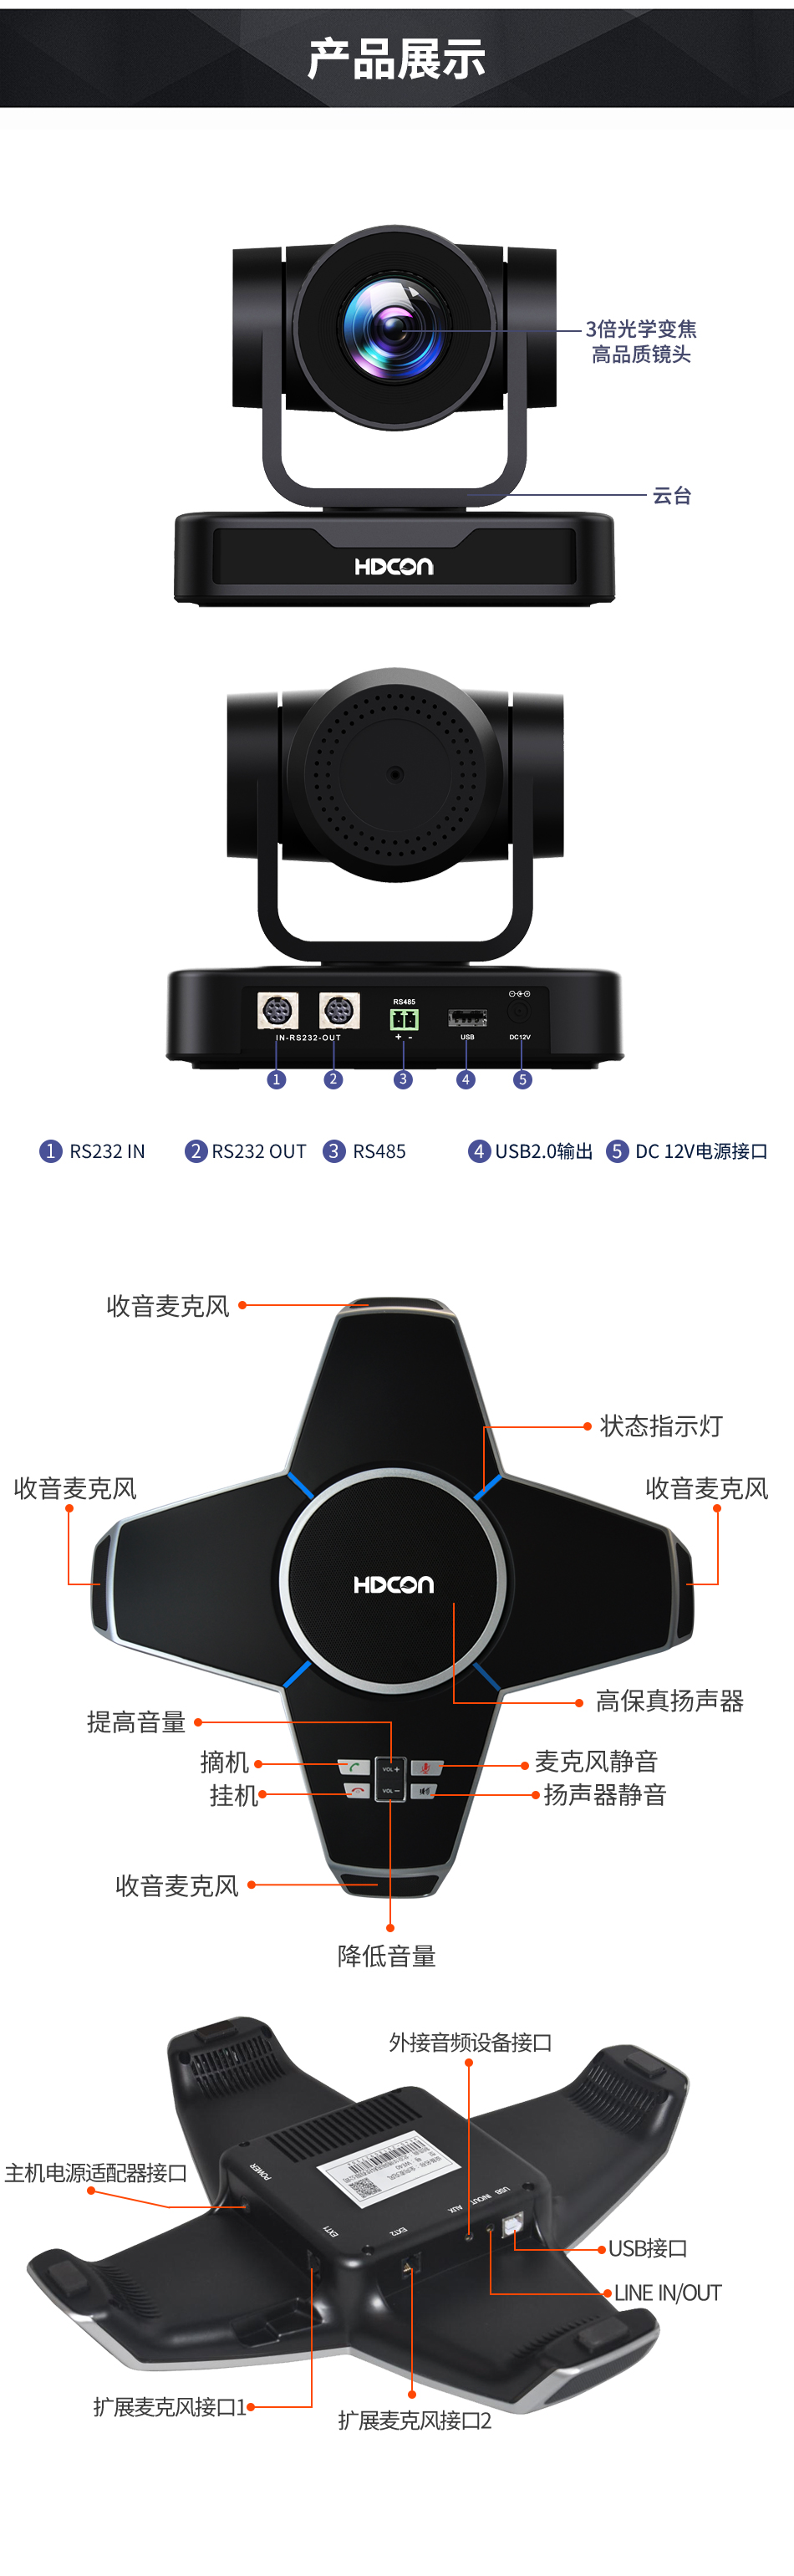 Huateng T7350 high-definition video conferencing system set with 3x zoom conference camera USB omnidirectional microphone